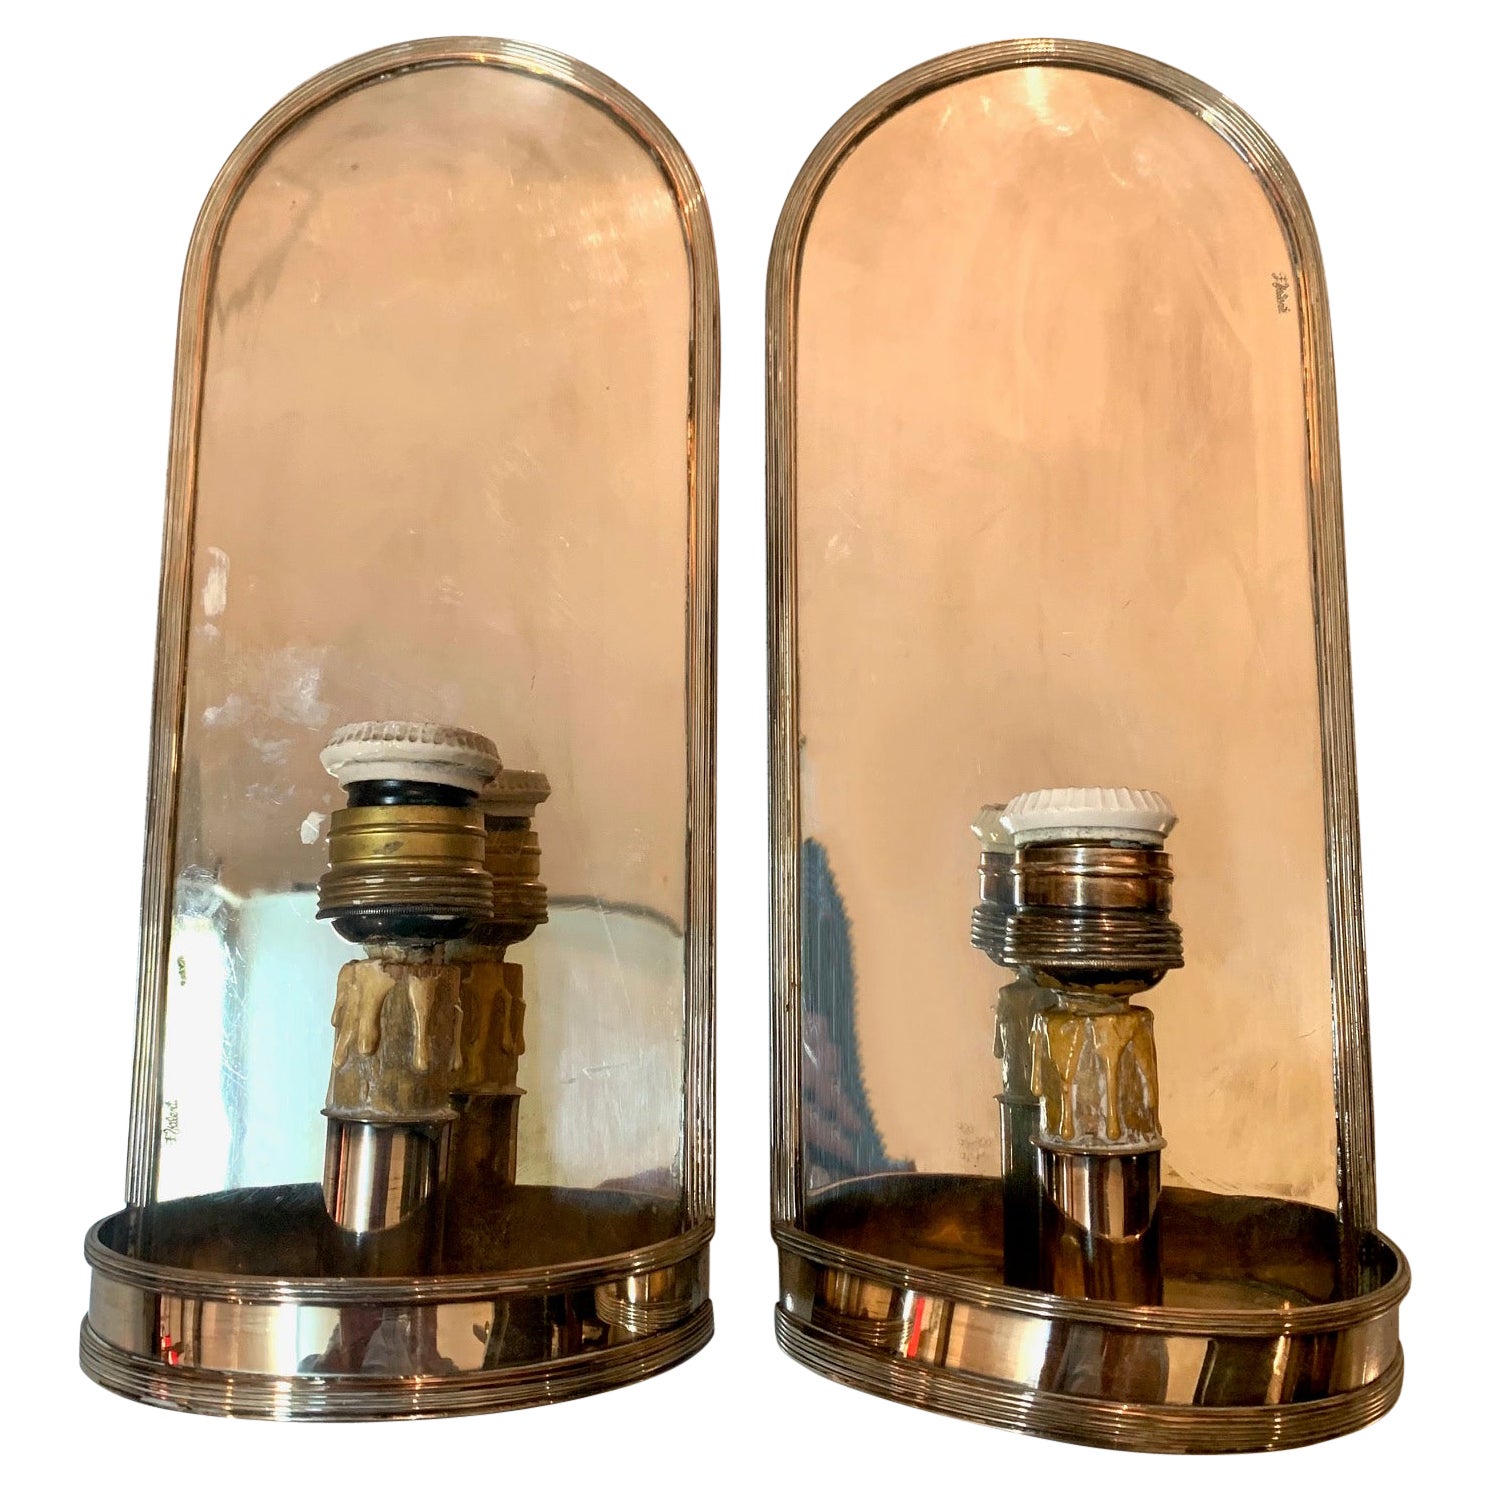 20th Century Spanish Century Vintage Silver Metal Wall Light Sconces by Valenti For Sale